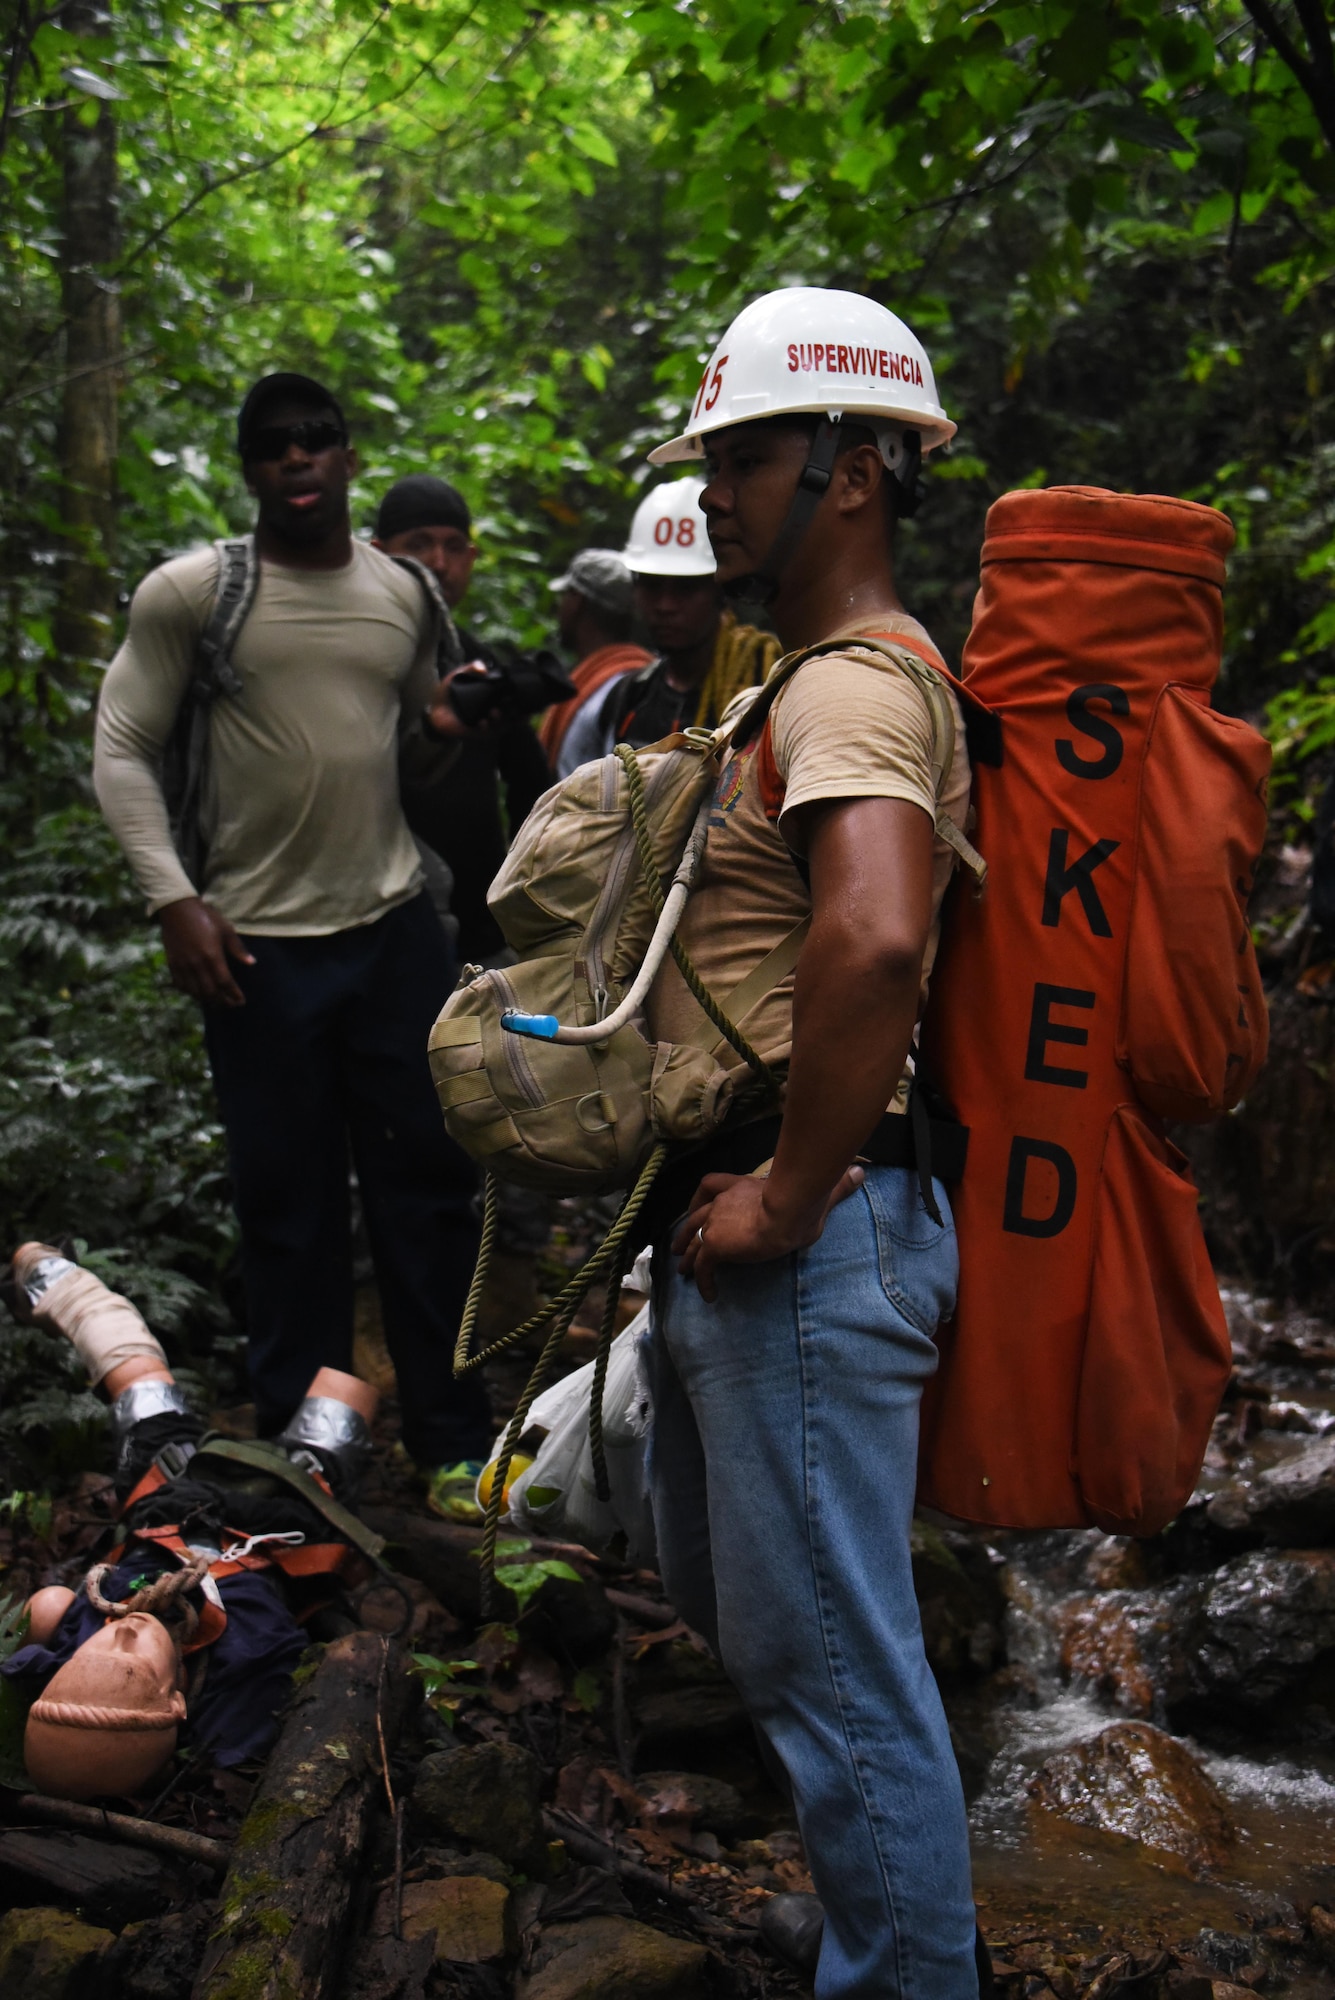 Honduran PUMCIR (Personal Utilizado en Misiones Contra Incendio y Rescate – Personnel Used in Fire and Rescue) volunteer carrying a roll-up stretcher rests along a creek in Comayagua National Park near El Volcan, Honduras, Sept. 24, 2016 while on a six-mile round-trip hike to a cave to conduct search and rescue training. He was accompanied by a dozen other PUMCIR volunteers and seven U.S. Air Force Airmen assigned to Joint Task Force-Bravo at Soto Cano Air Base, Honduras, and Herberth Gaekel, PUMCIR instructor and founder. (U.S. Air Force photo by Capt. David Liapis)